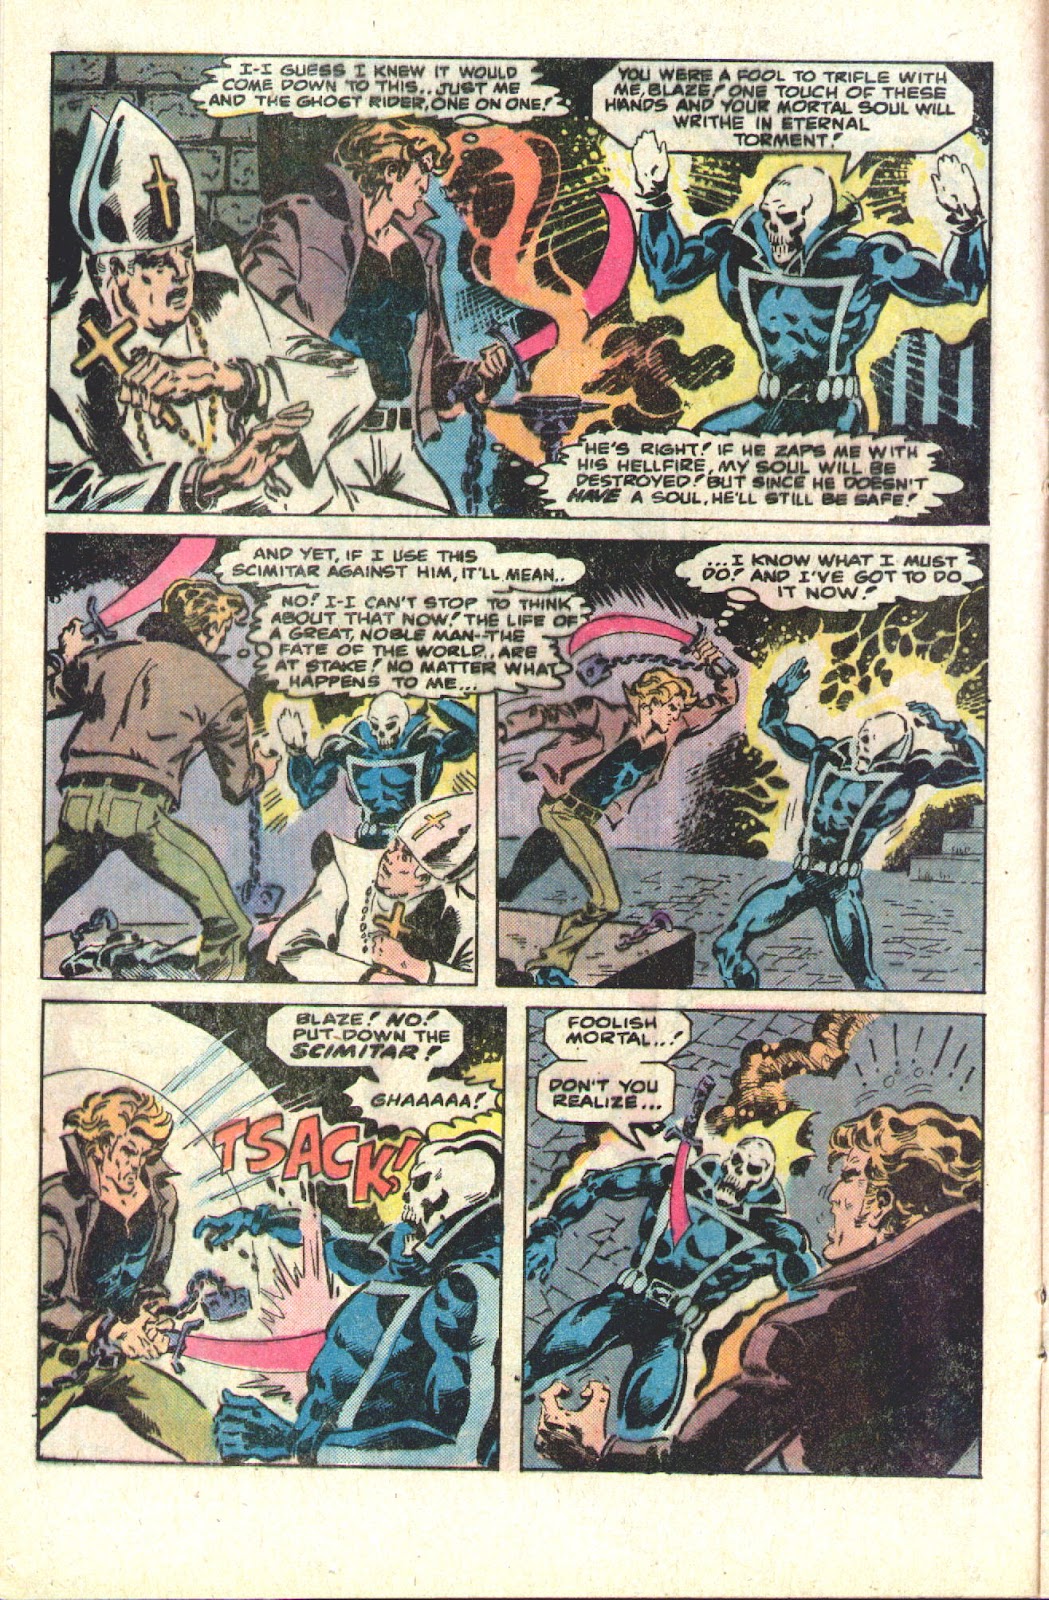 What If? (1977) issue 28 - Daredevil became an agent of SHIELD - Page 24